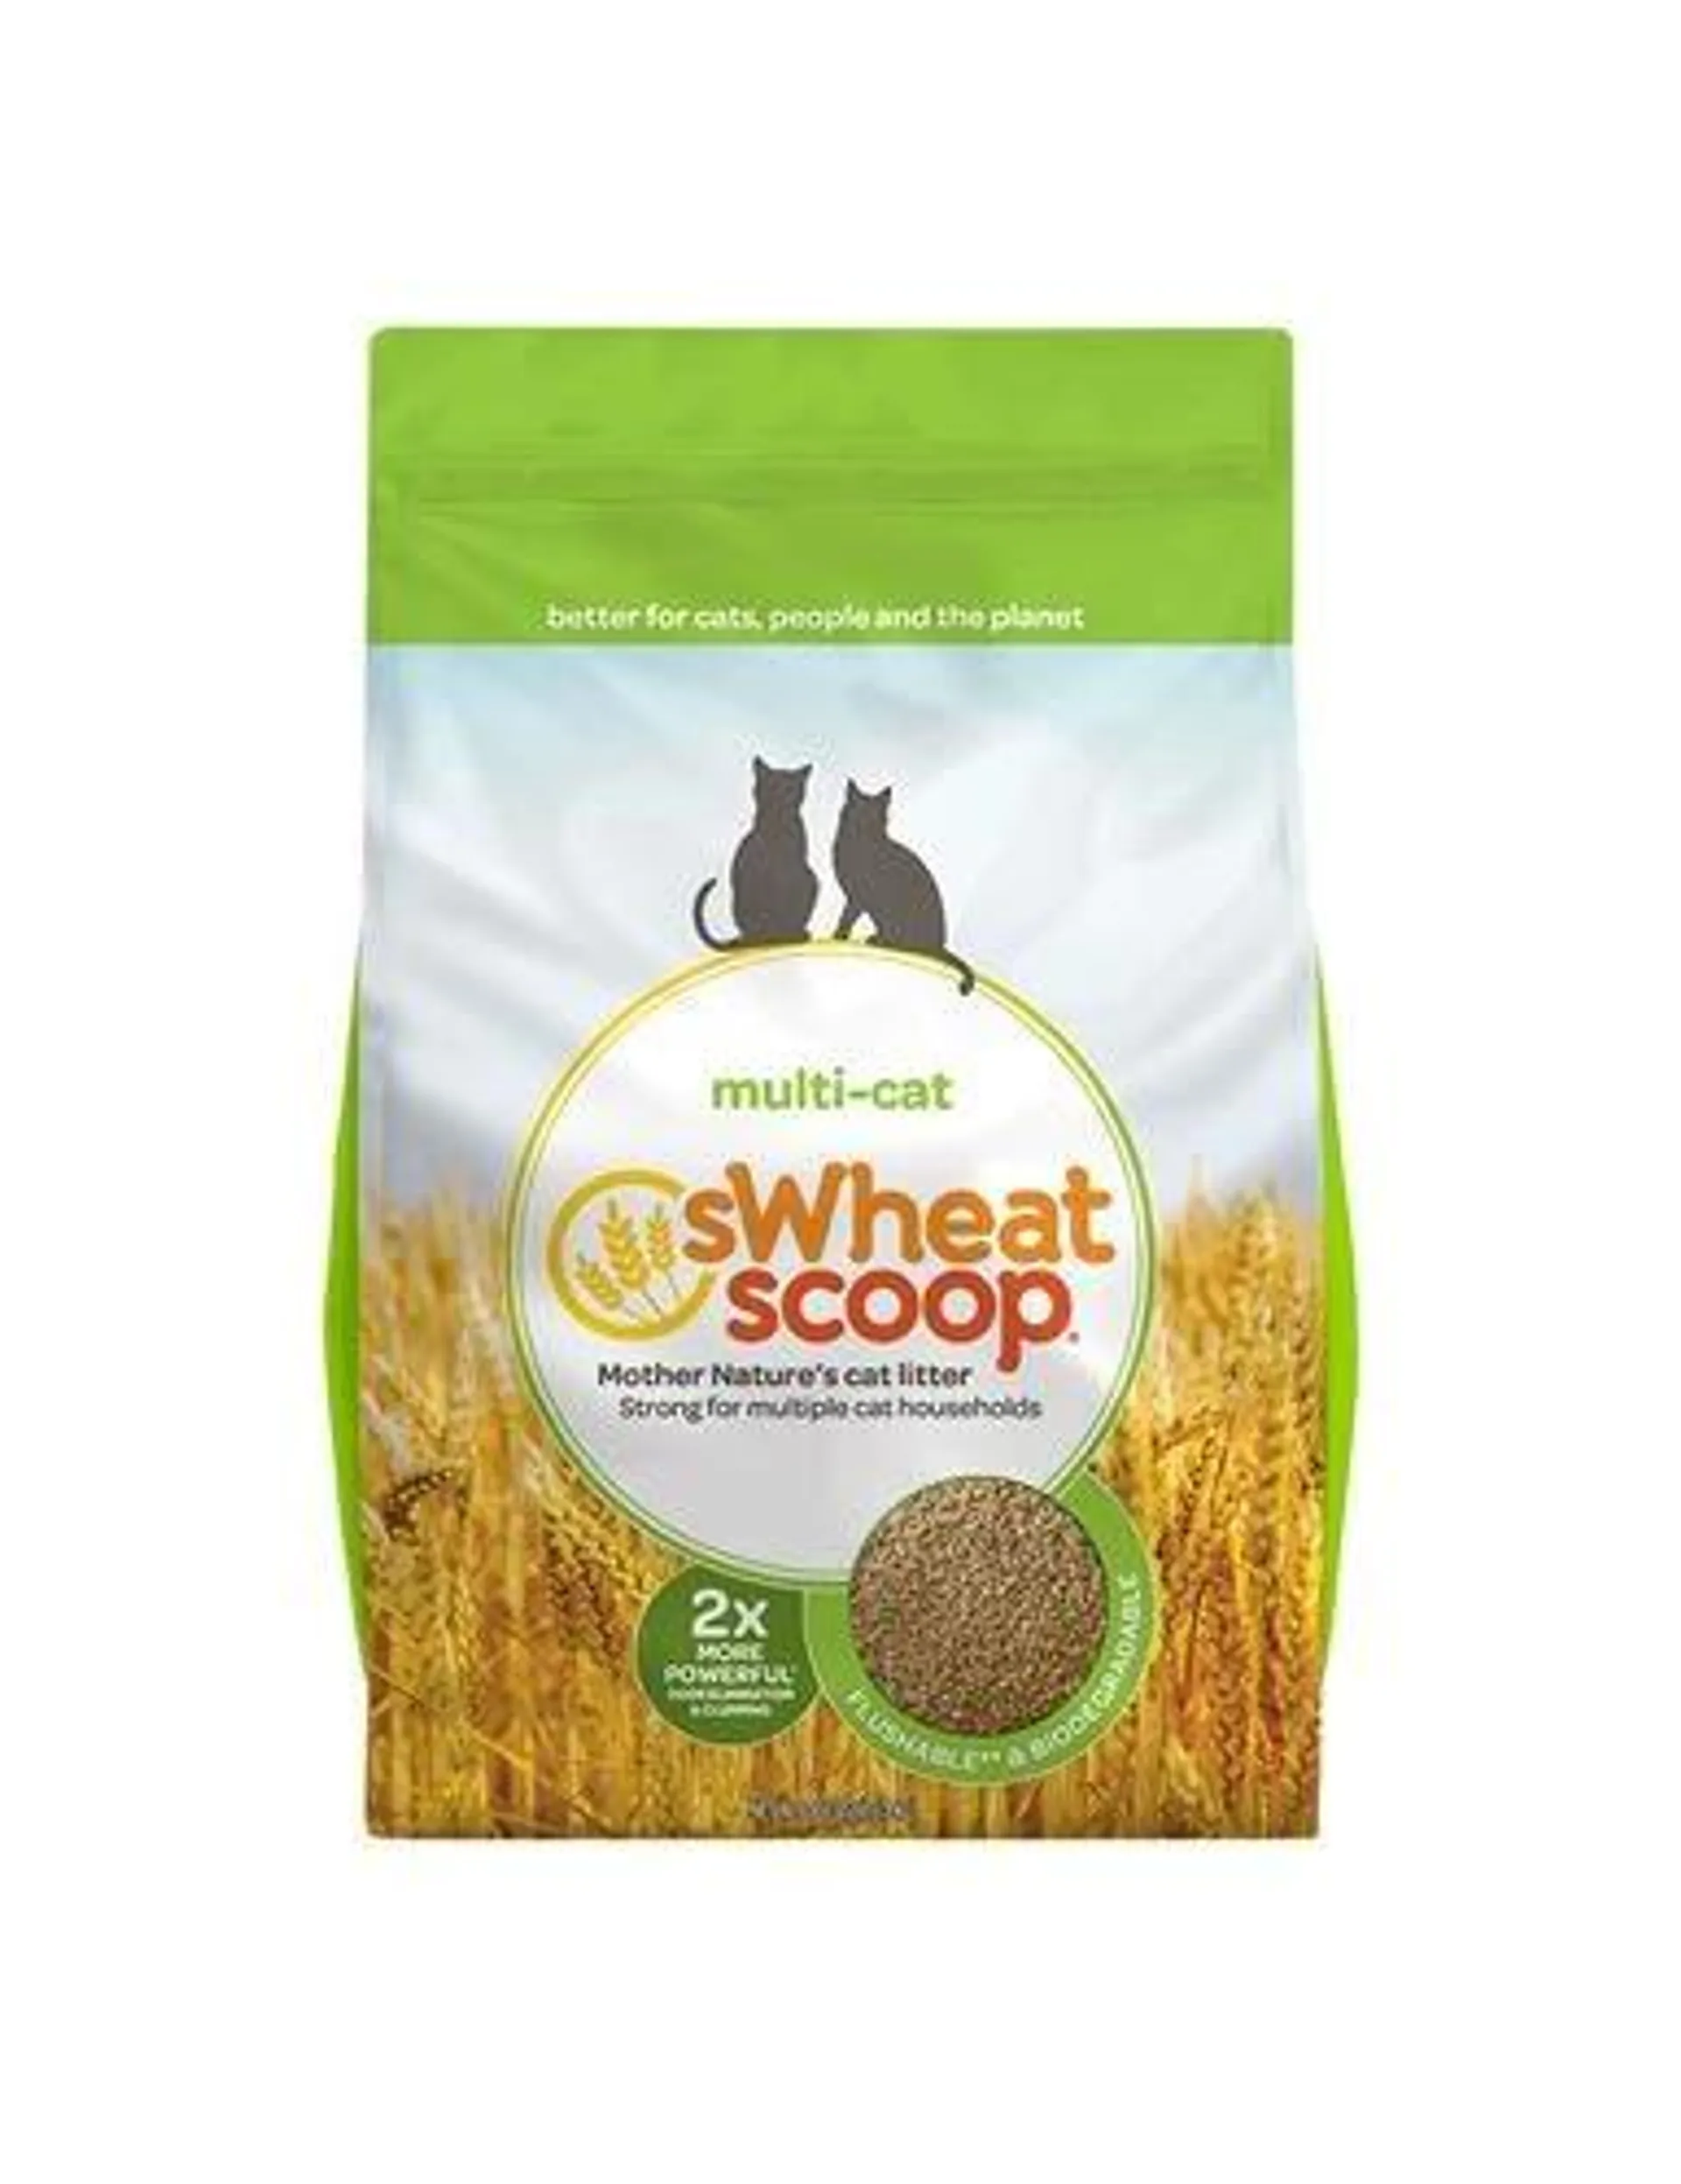 sWheat Scoop Multi-Cat Unscented Natural Clumping Wheat Cat Litter, 36 Pounds